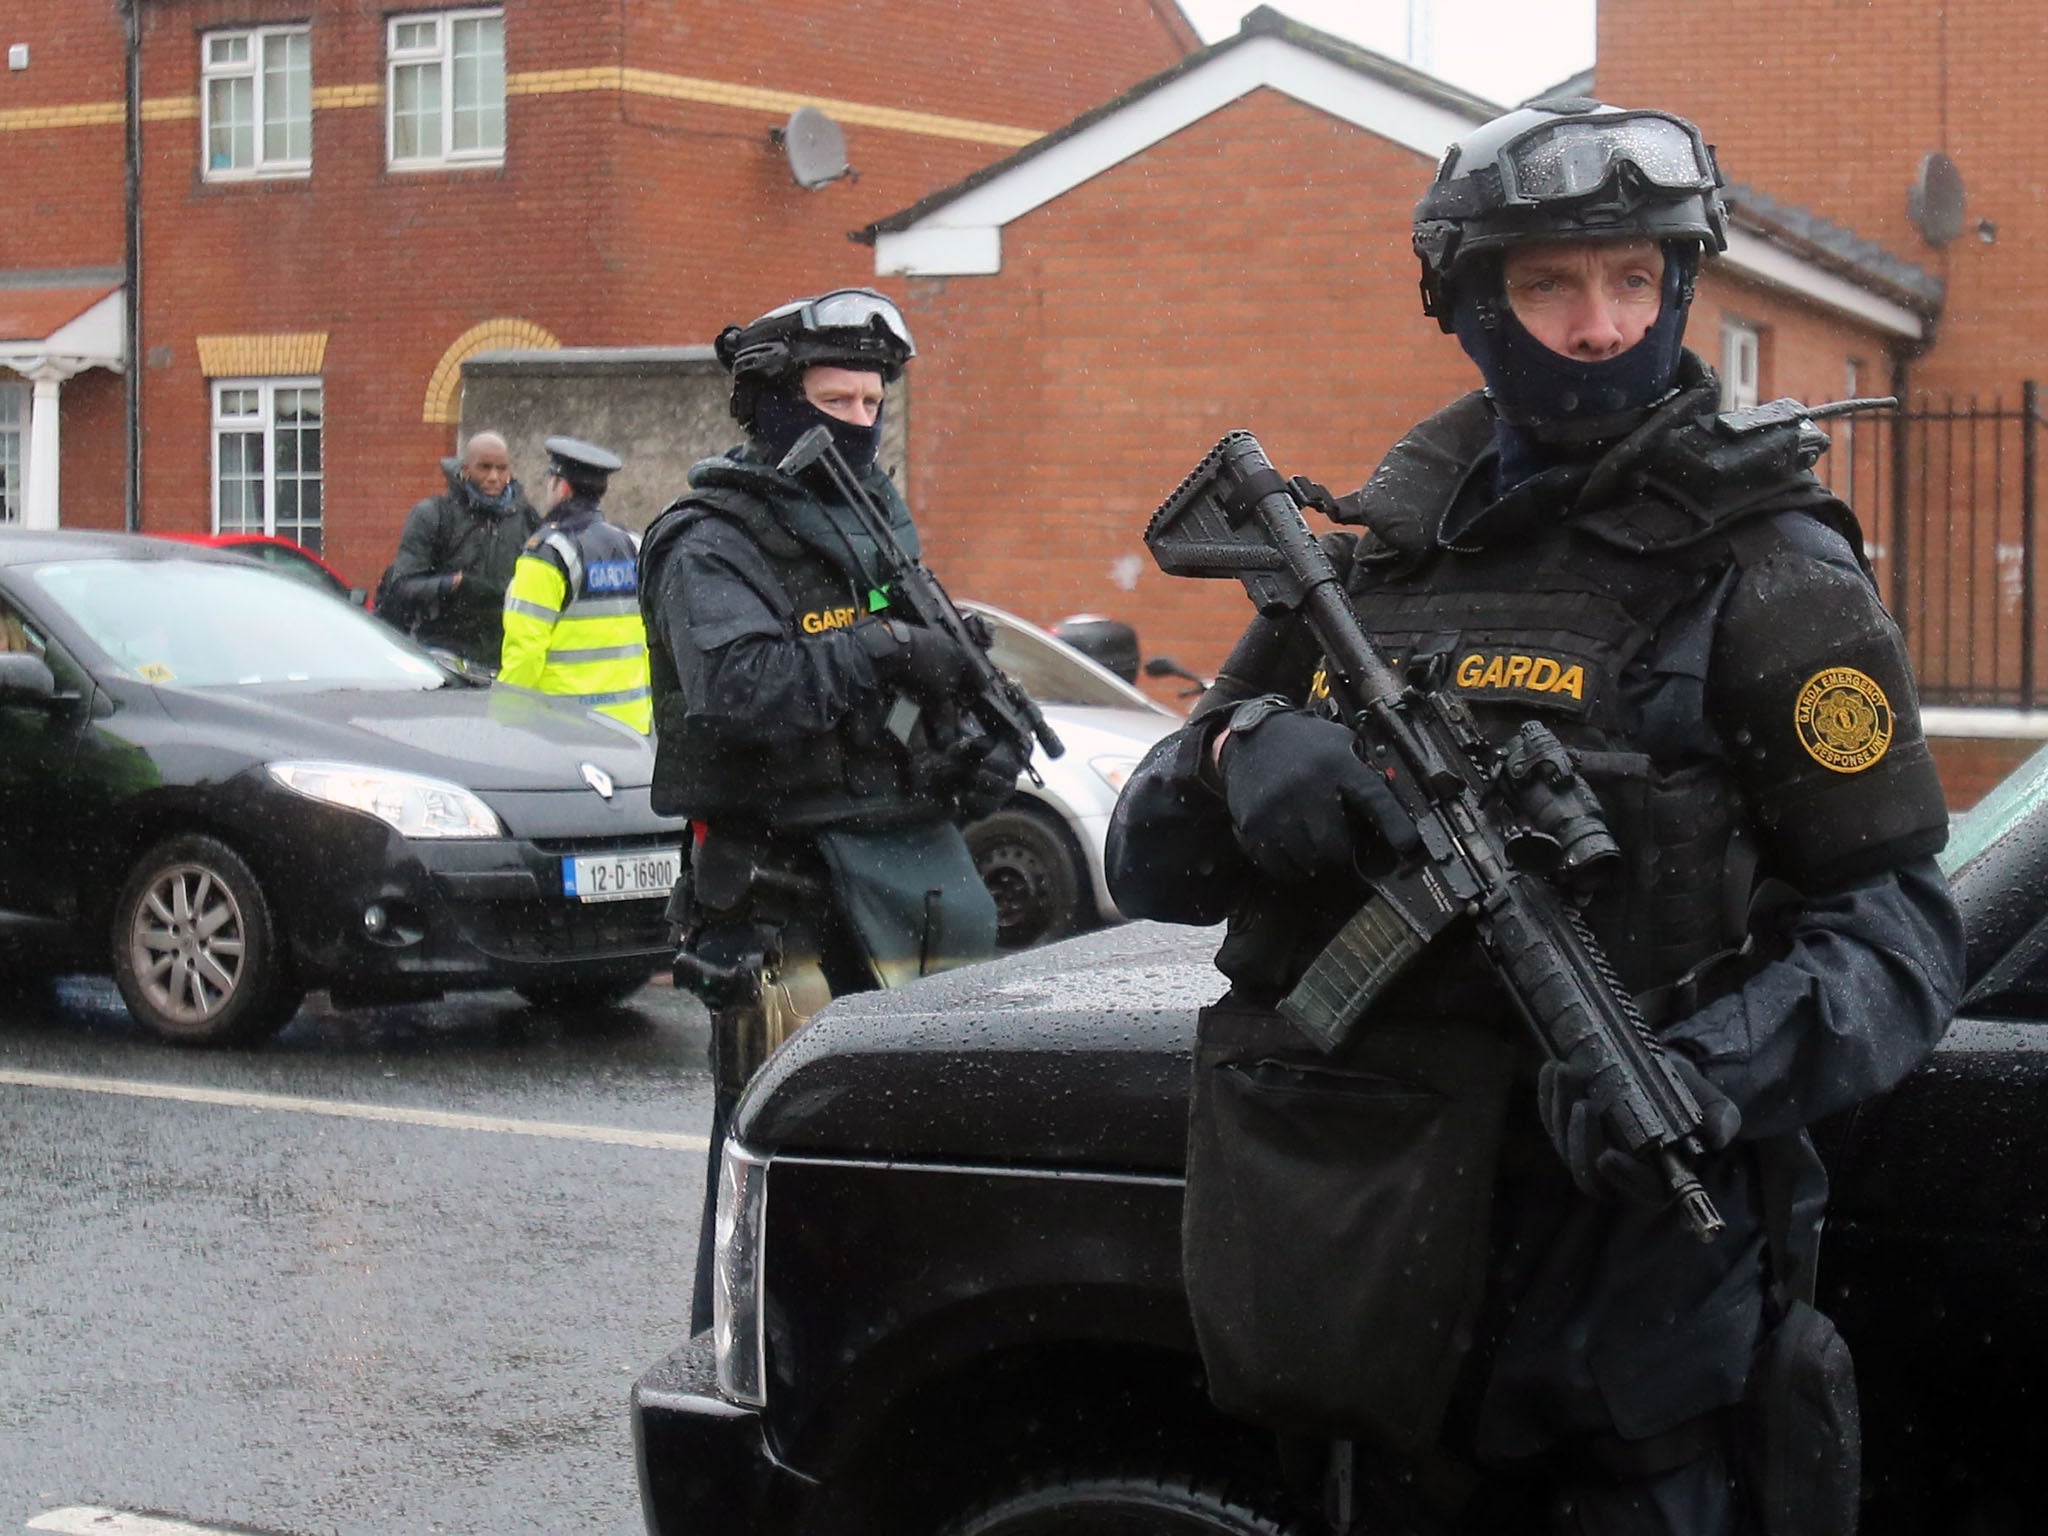 Armed Gardai from the forces Emergency Response Unit on patrol in North Inner City Dublin as gang violence has resulted in two murders in four days